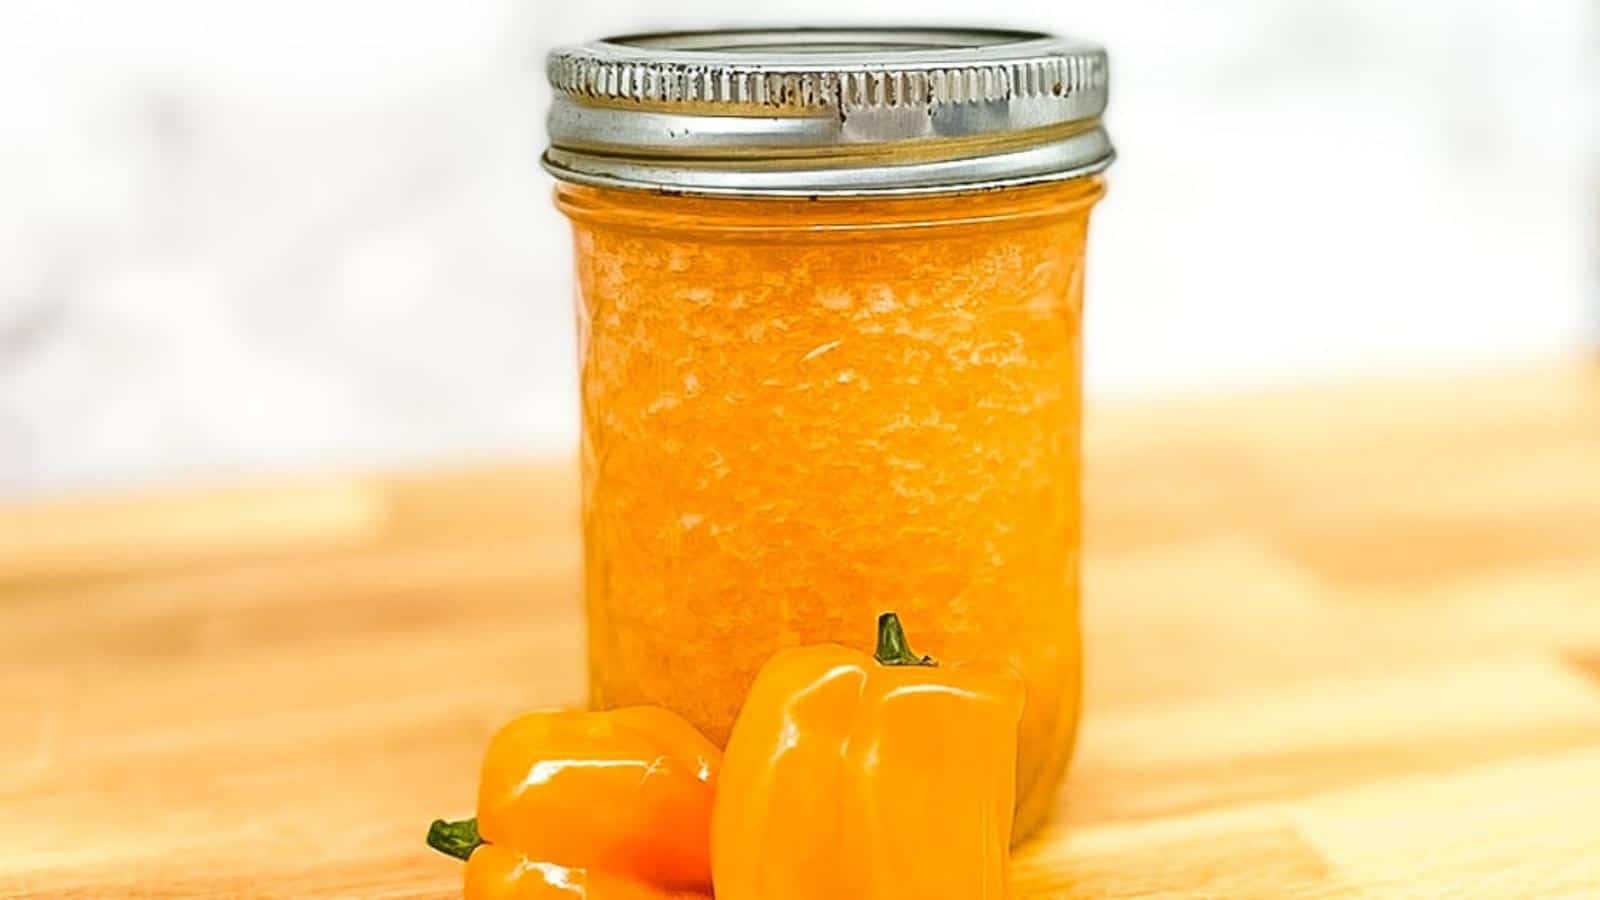 pineapple habanero sauce in a glass jar with a lid.